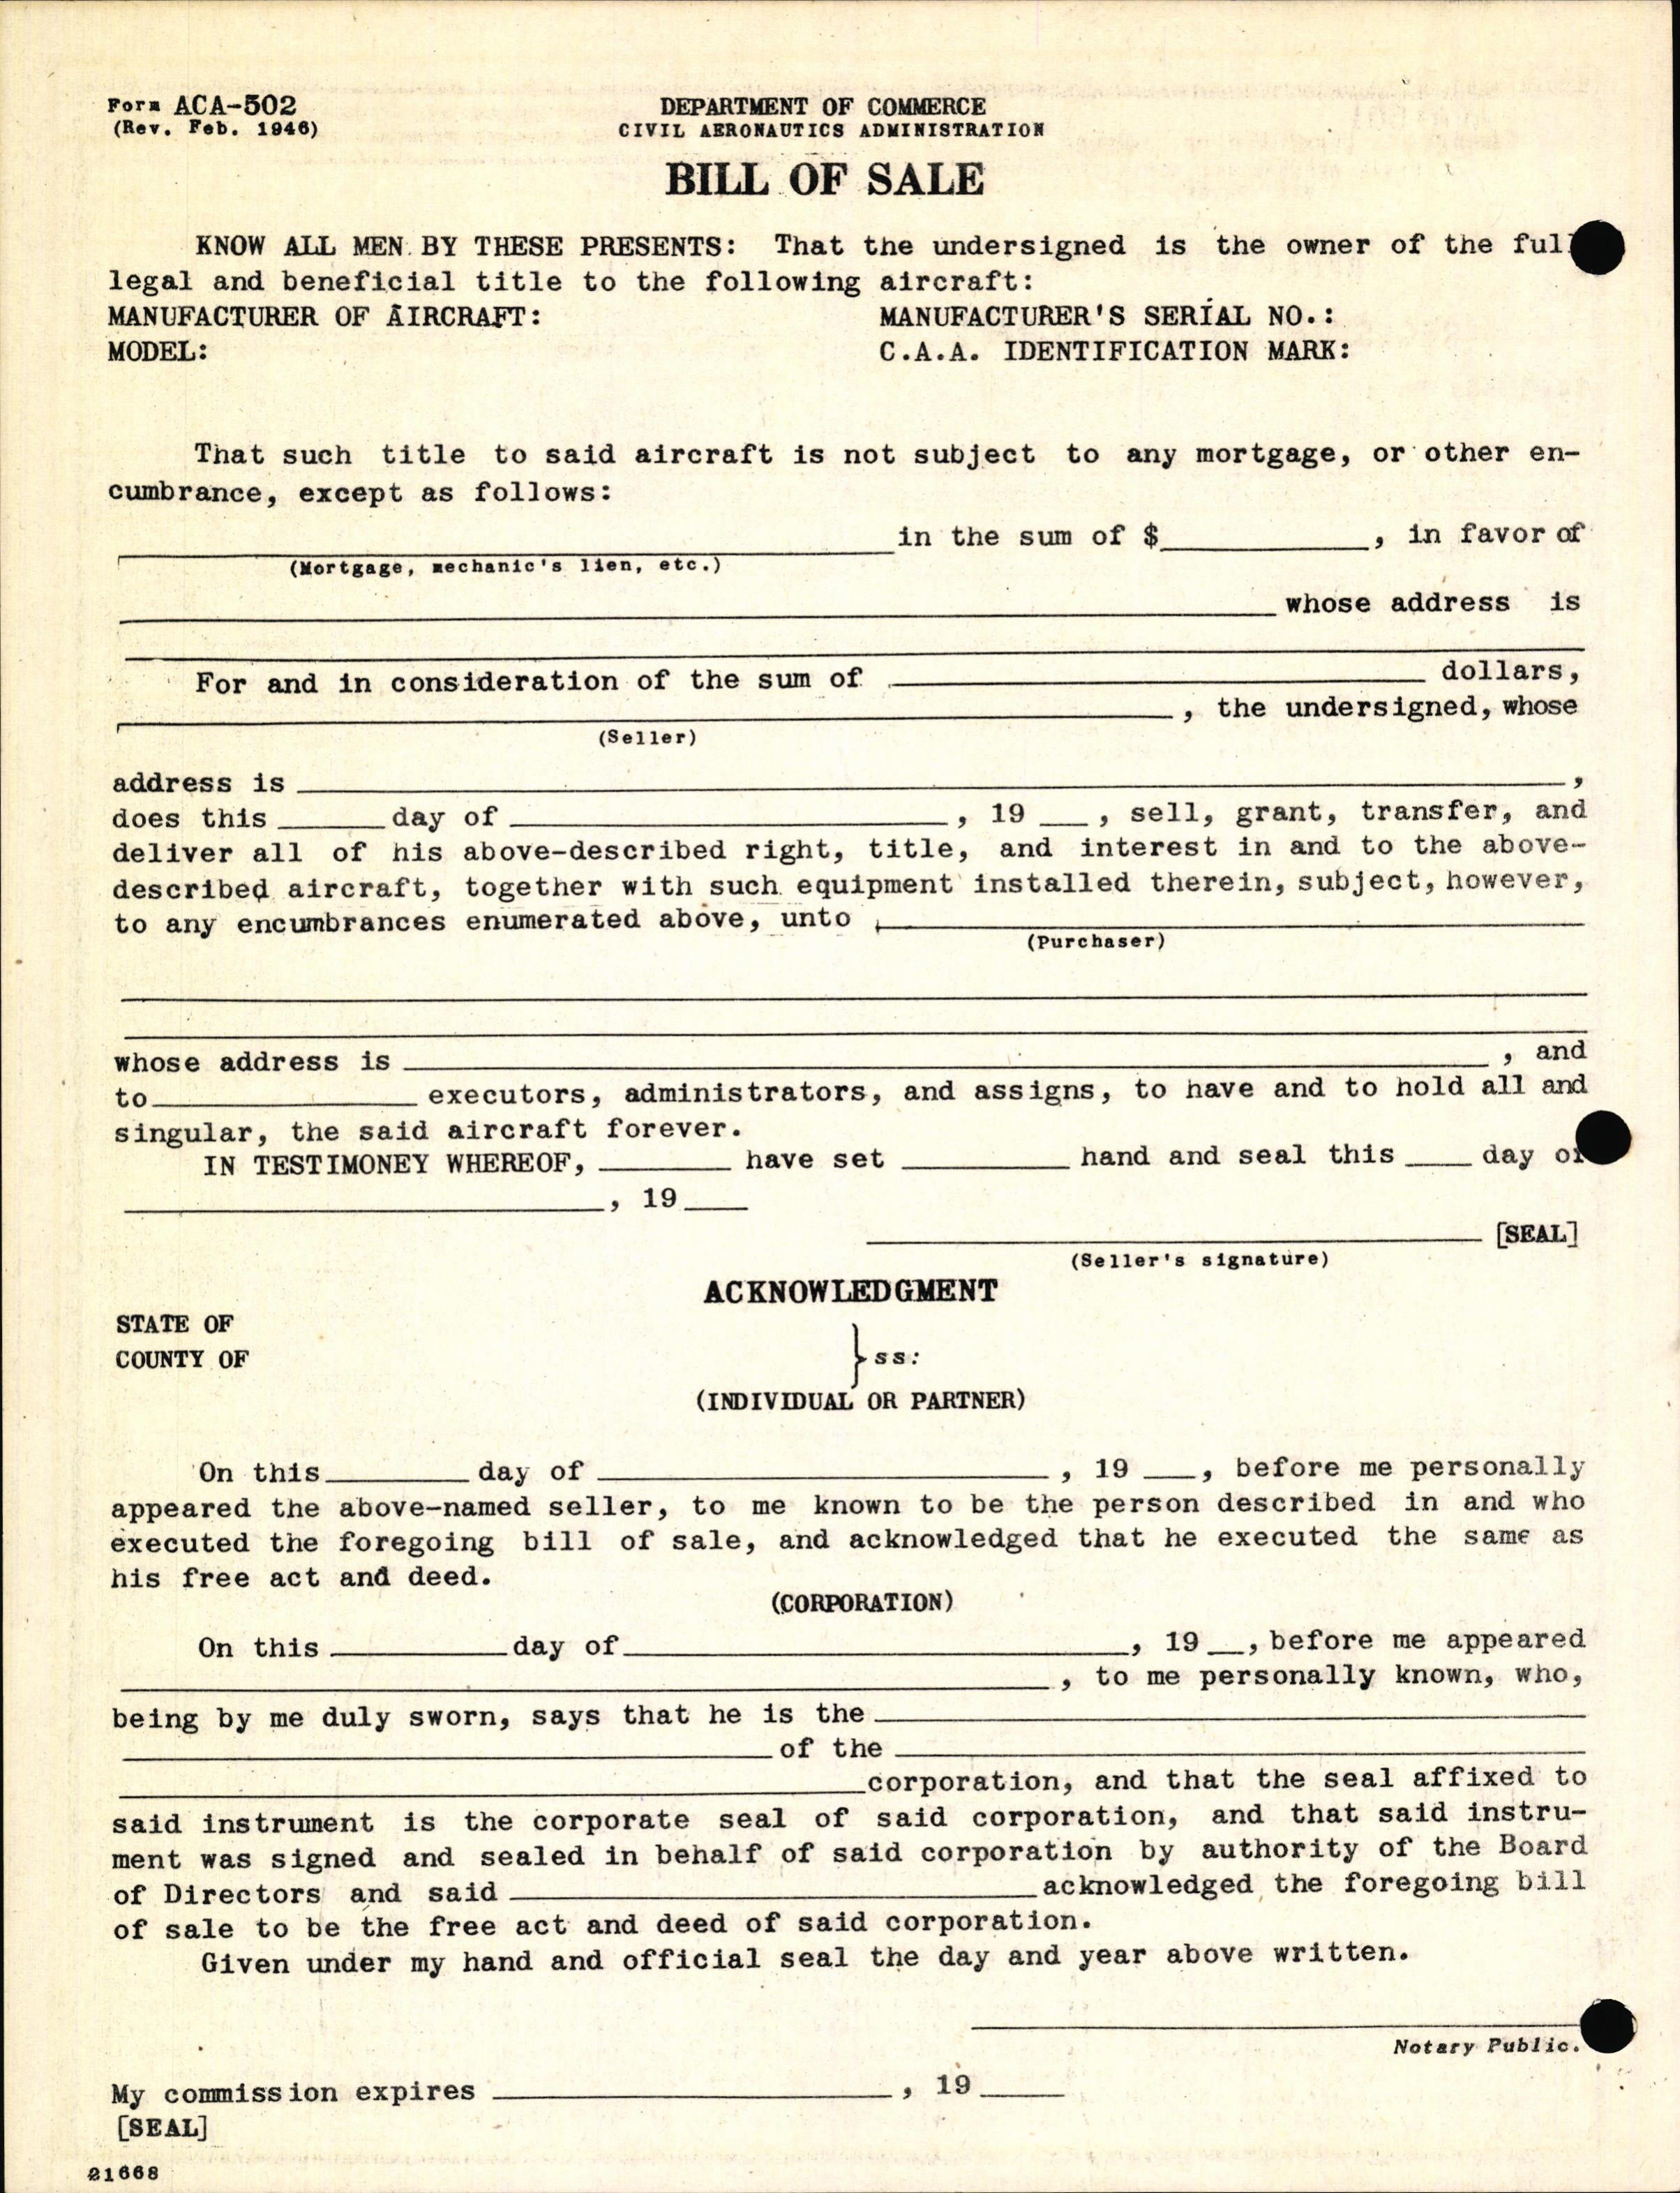 Sample page 6 from AirCorps Library document: Technical Information for Serial Number 2026